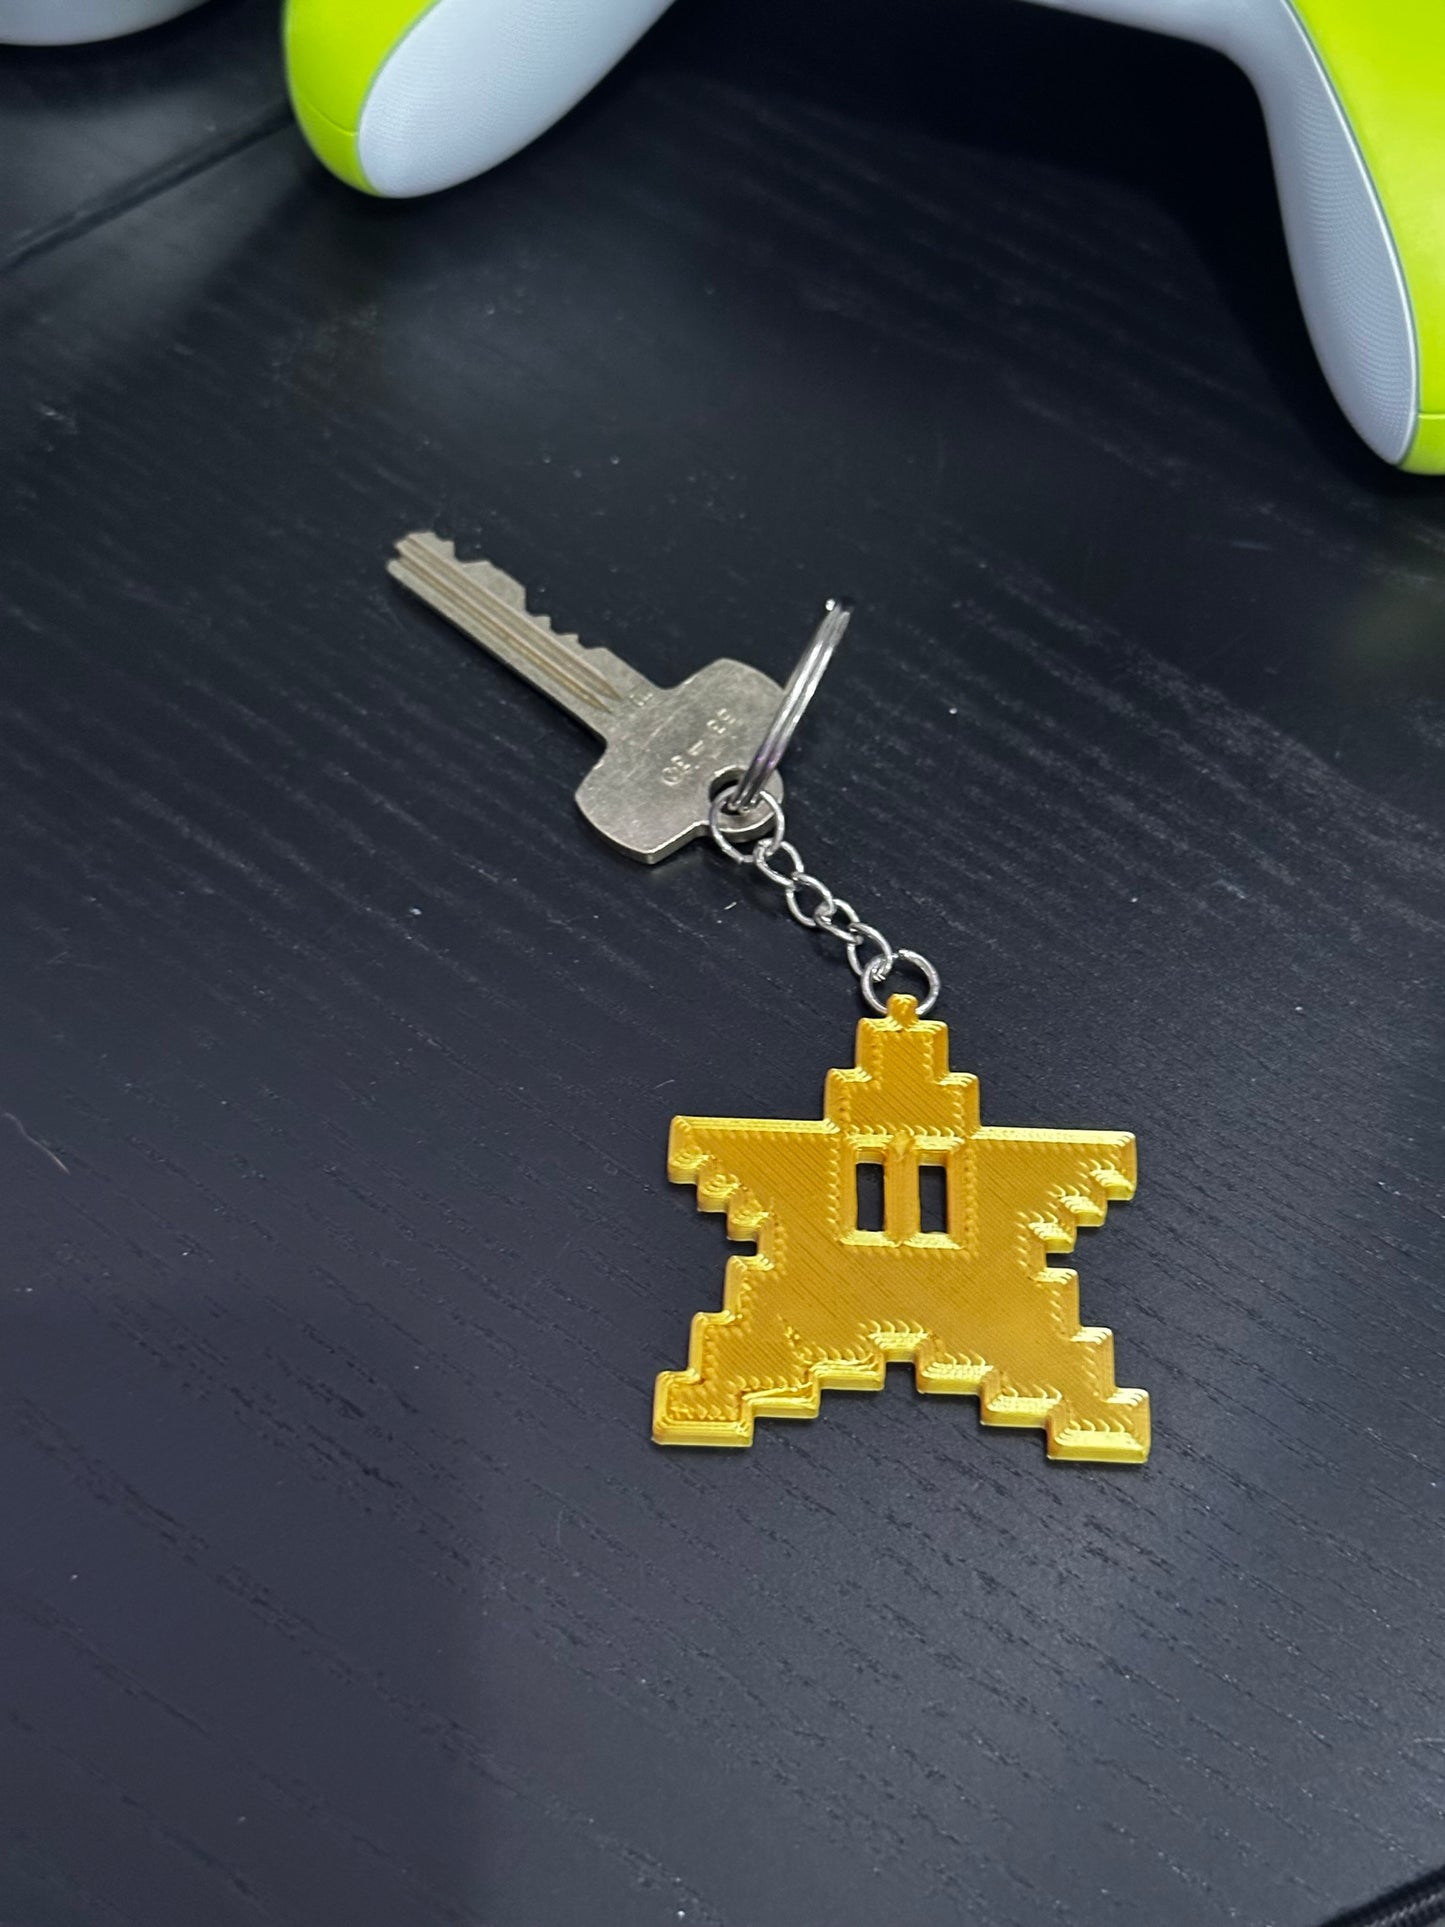 Super Mario Brothers Yellow Star Keychain - Handmade Keyring Inspired by the Iconic Movie